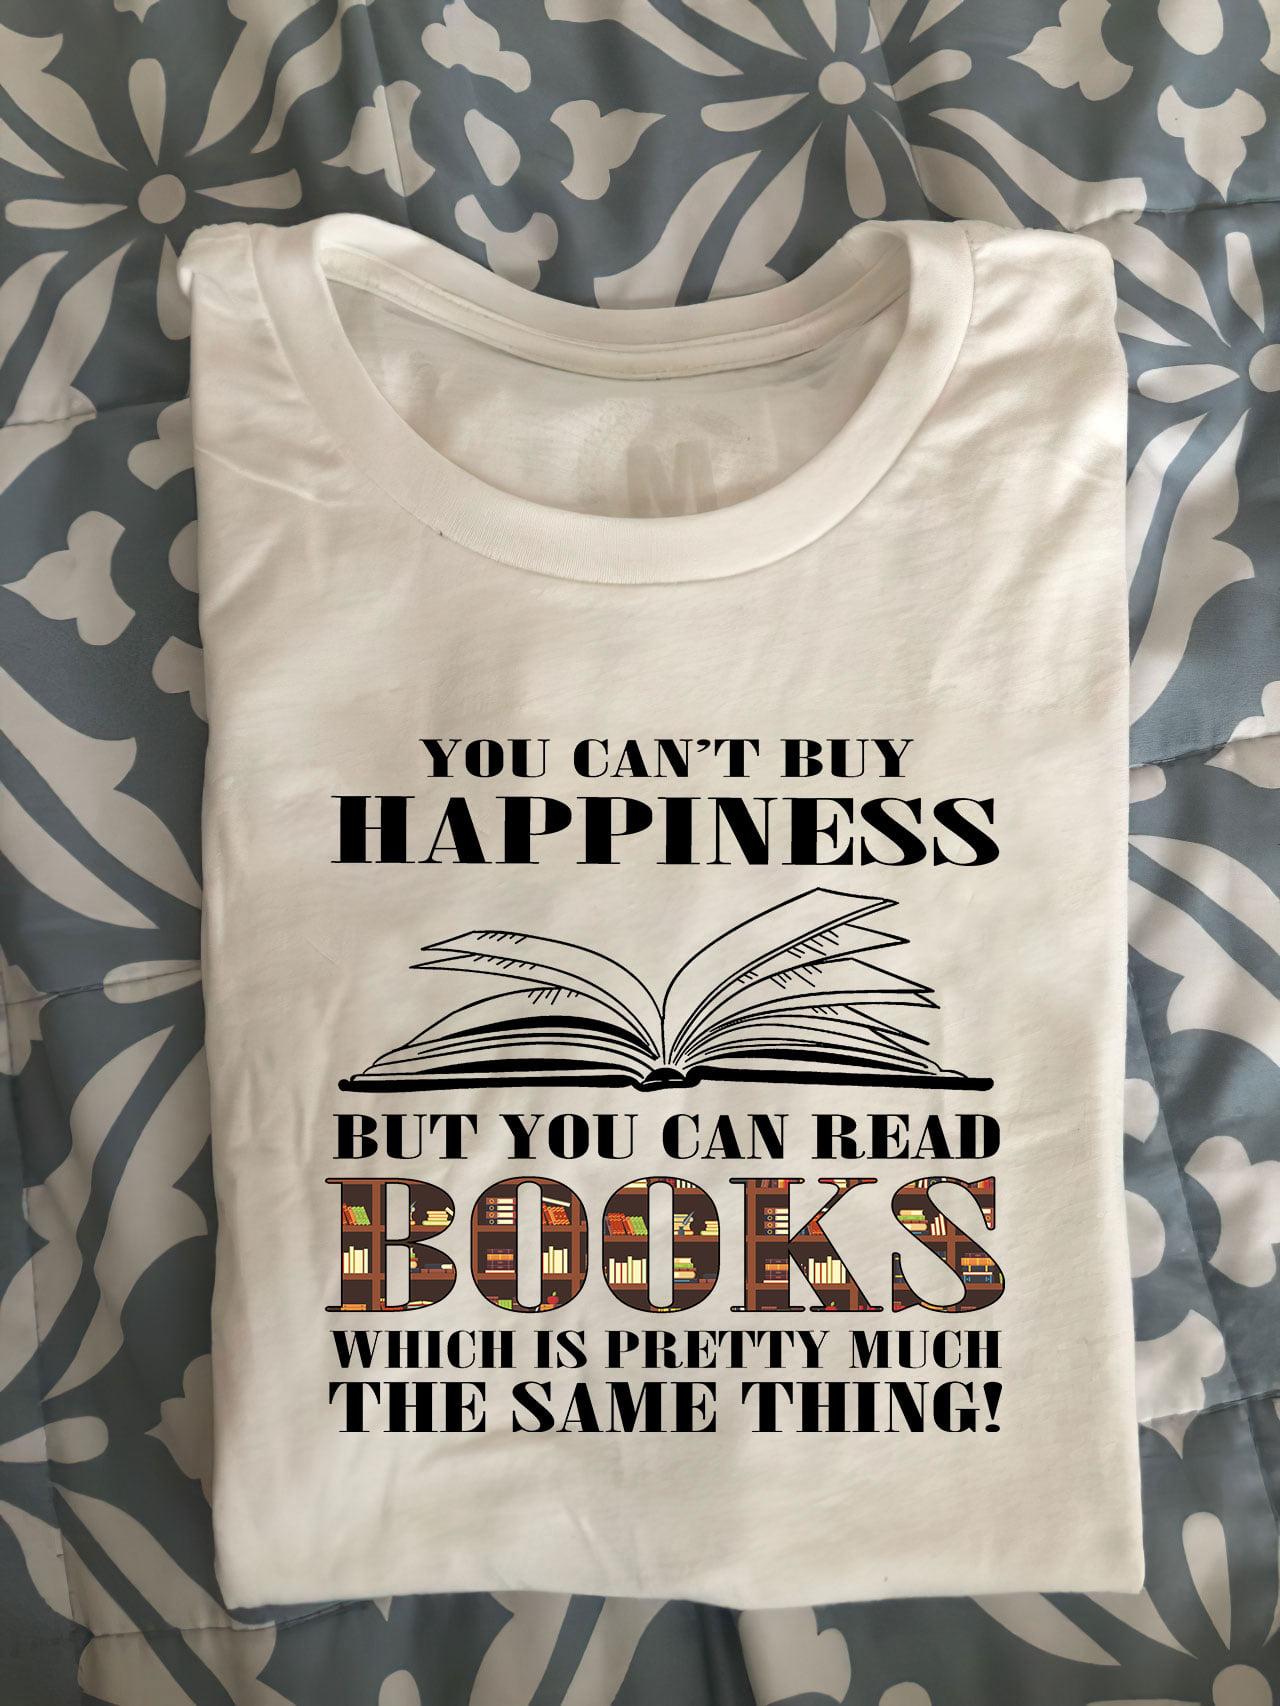 You can't buy happiness but you can read books - Gift for book reader, reading book the happiness